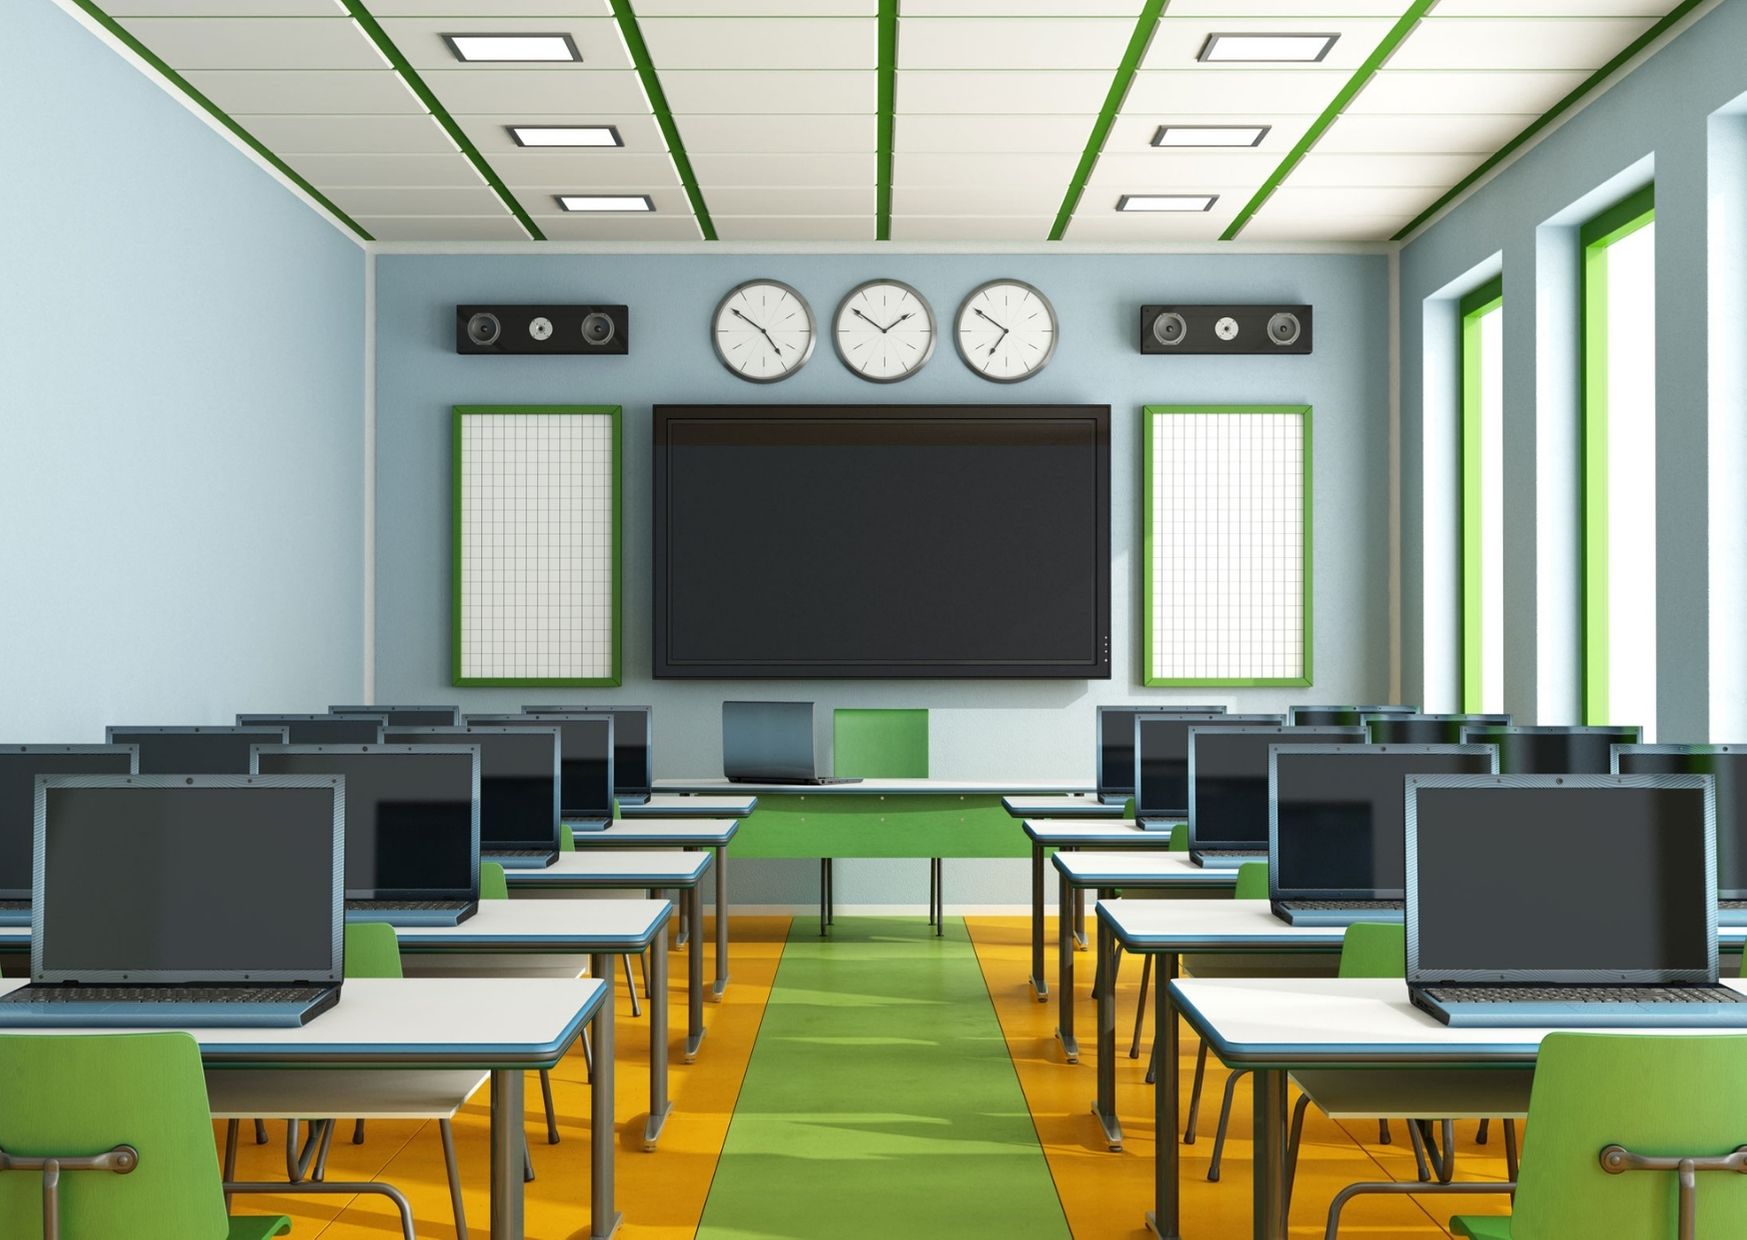 Modernize Your Classrooms With These Technology Upgrades